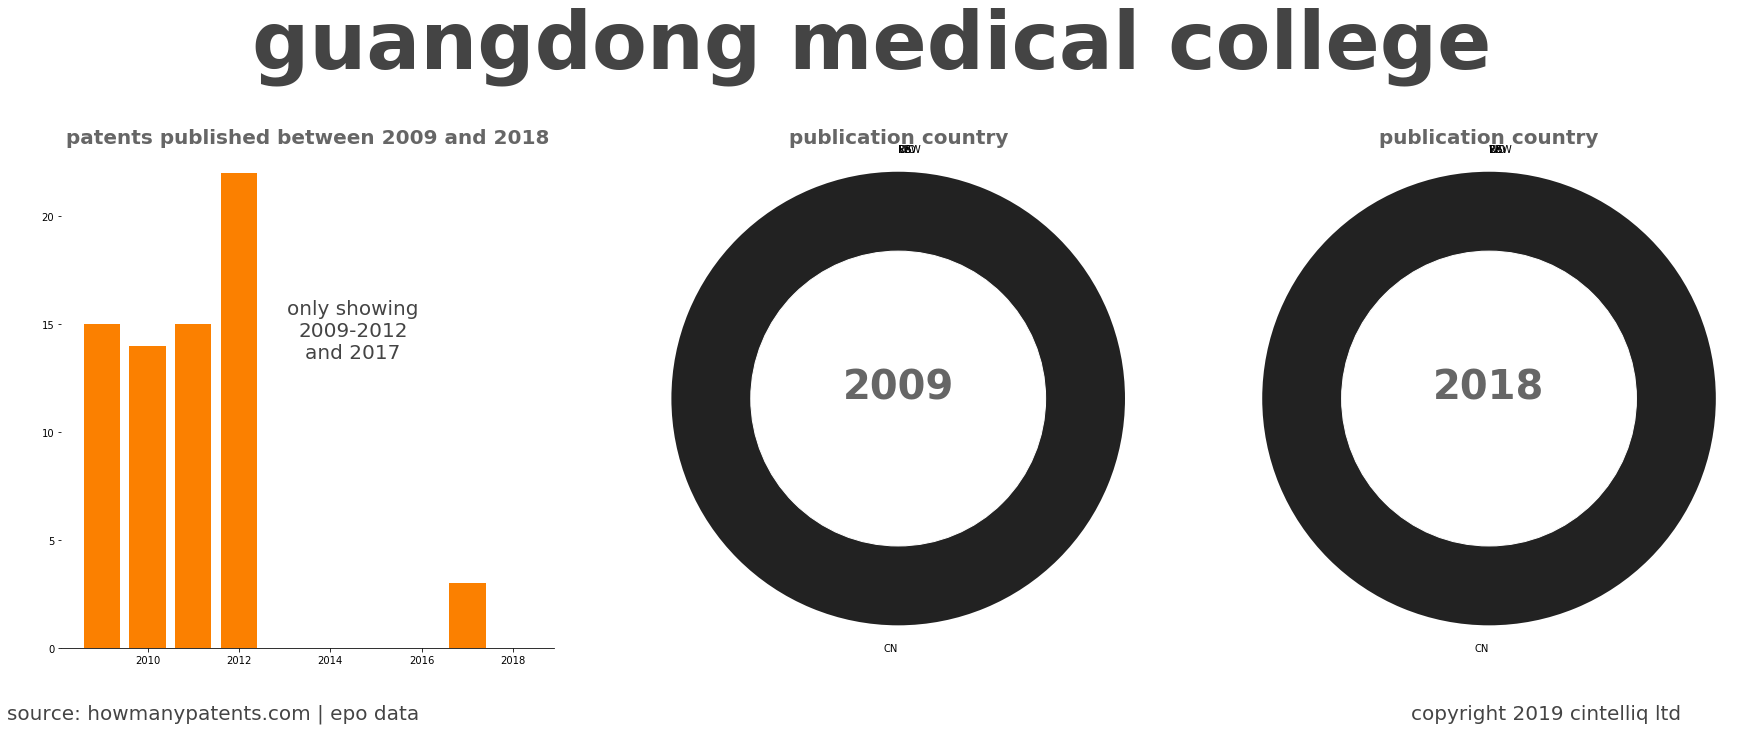 summary of patents for Guangdong Medical College